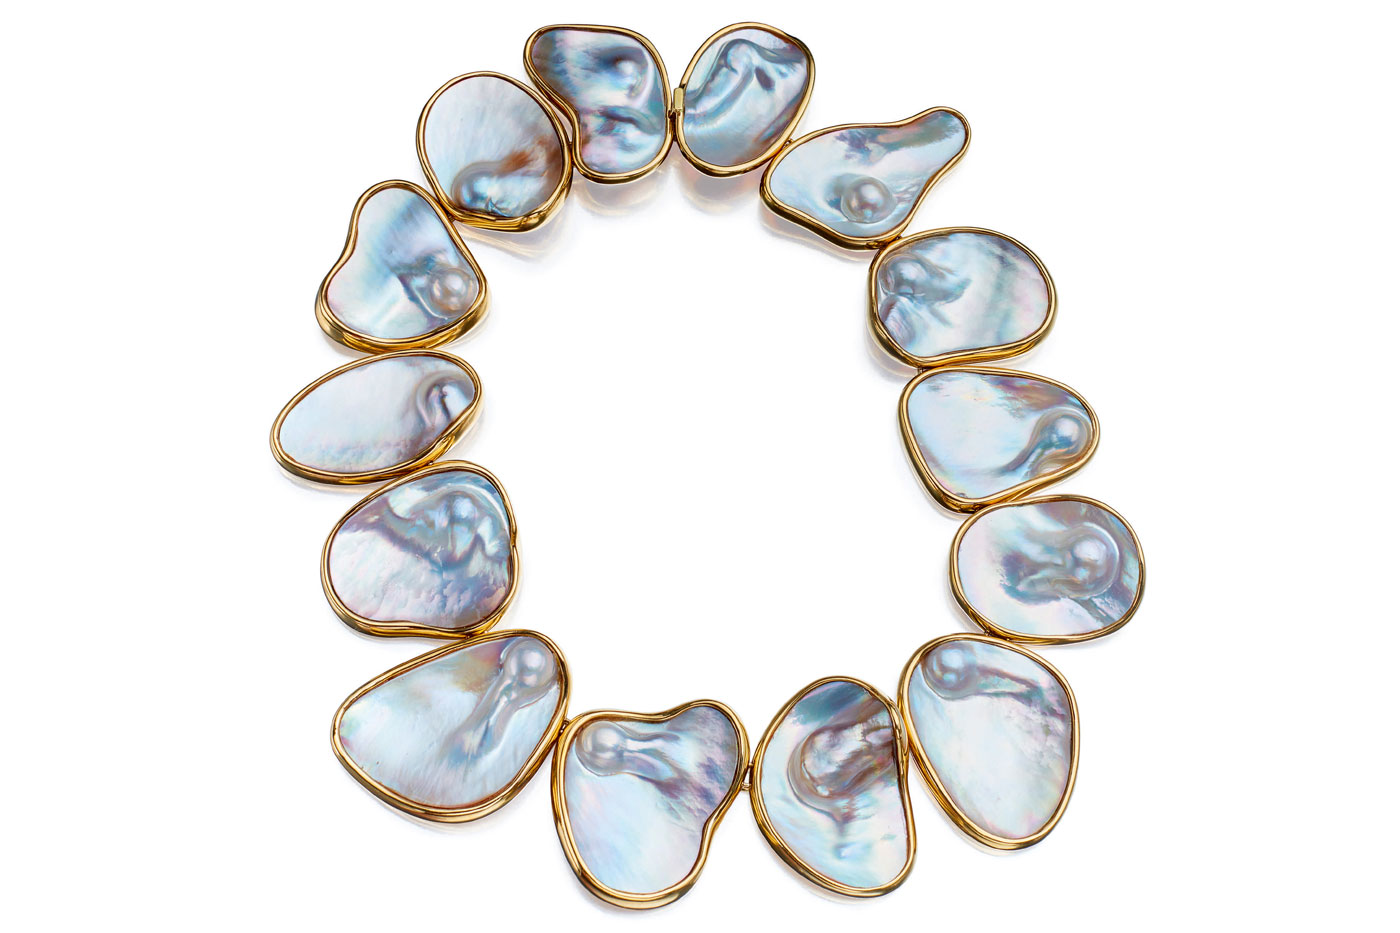 Tony Duquette Mabe pearl necklace